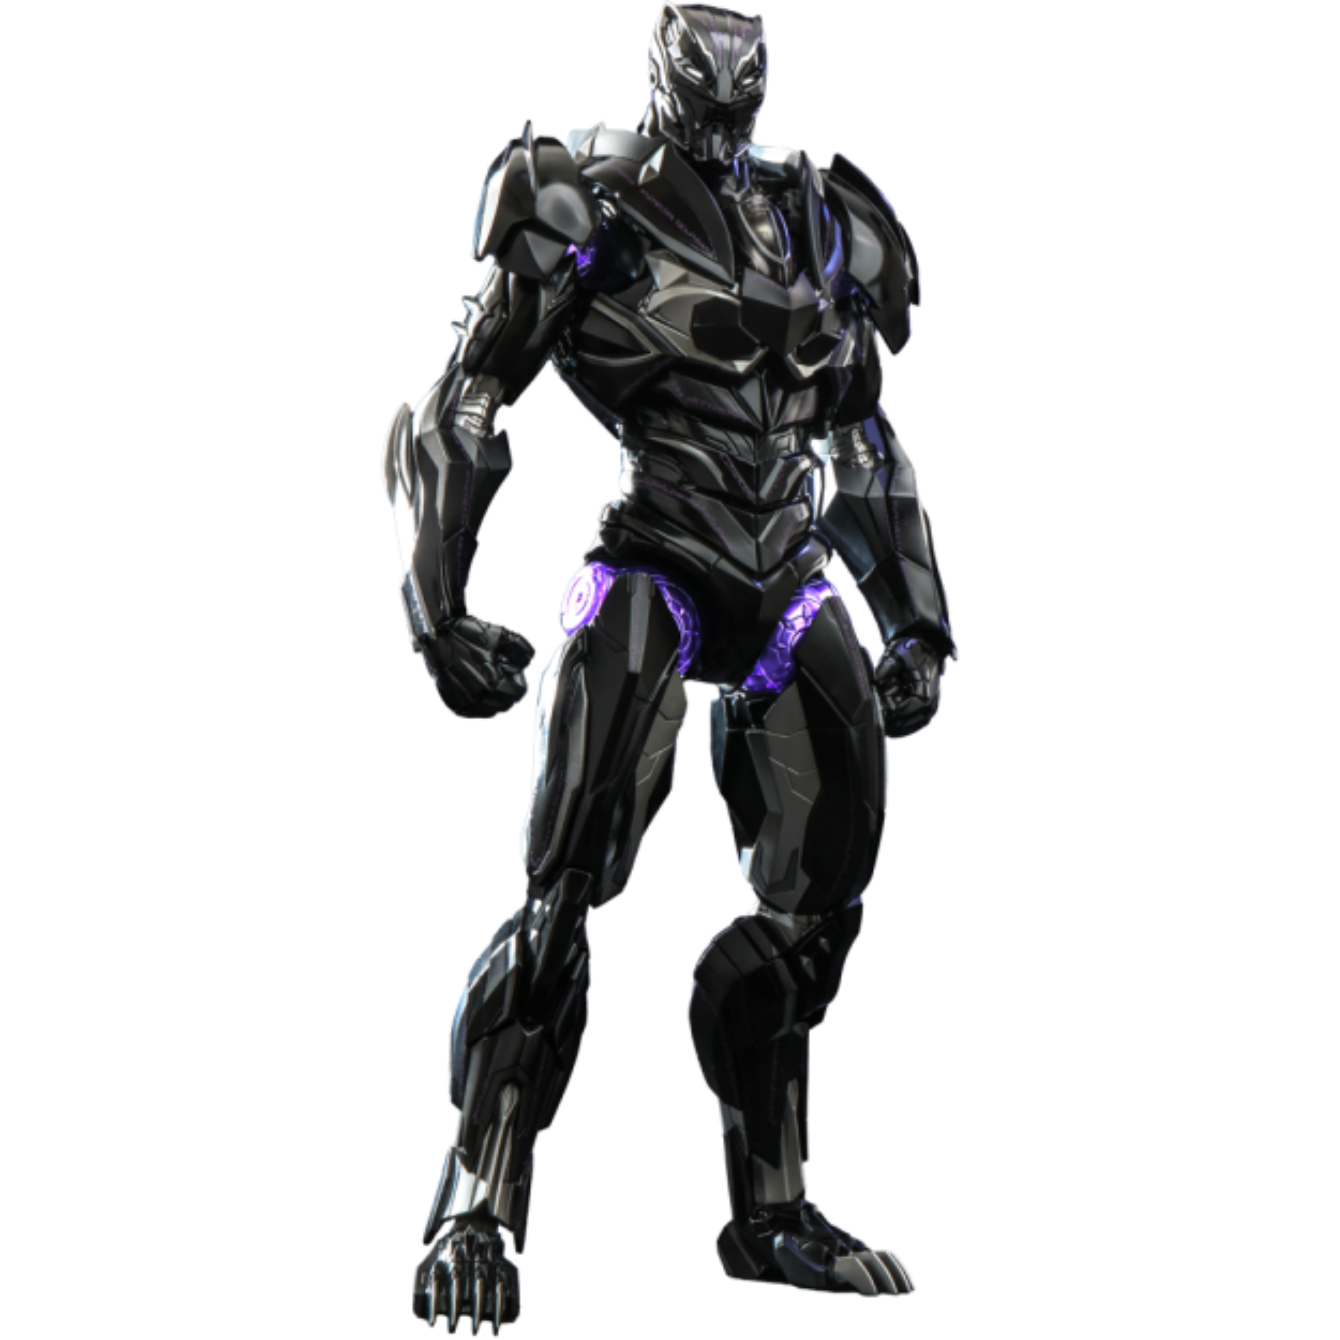 PRE-ORDER Black Panther Collectible Figure